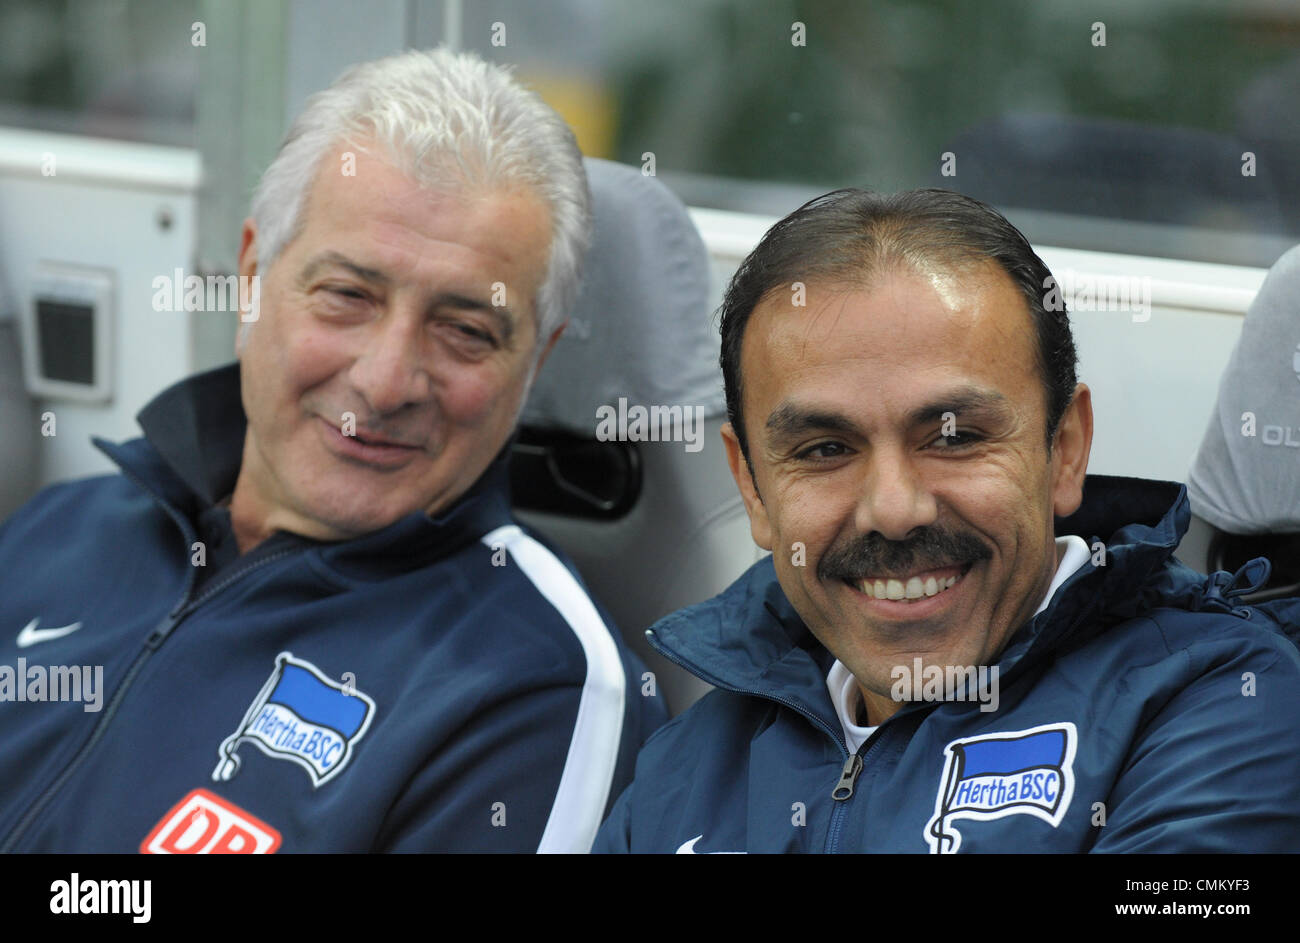 Berlin, Germany. 02nd Nov, 2013. Berlin's team leader Nello di Martino (L) and head coach Jos Luhukay during the German Bundesliga match between Hertha BSC and FC Schalke 04 at the Olympiastadion in Berlin, Germany, 02 November 2013. Photo: Oliver Mehlis/dpa/Alamy Live News Stock Photo